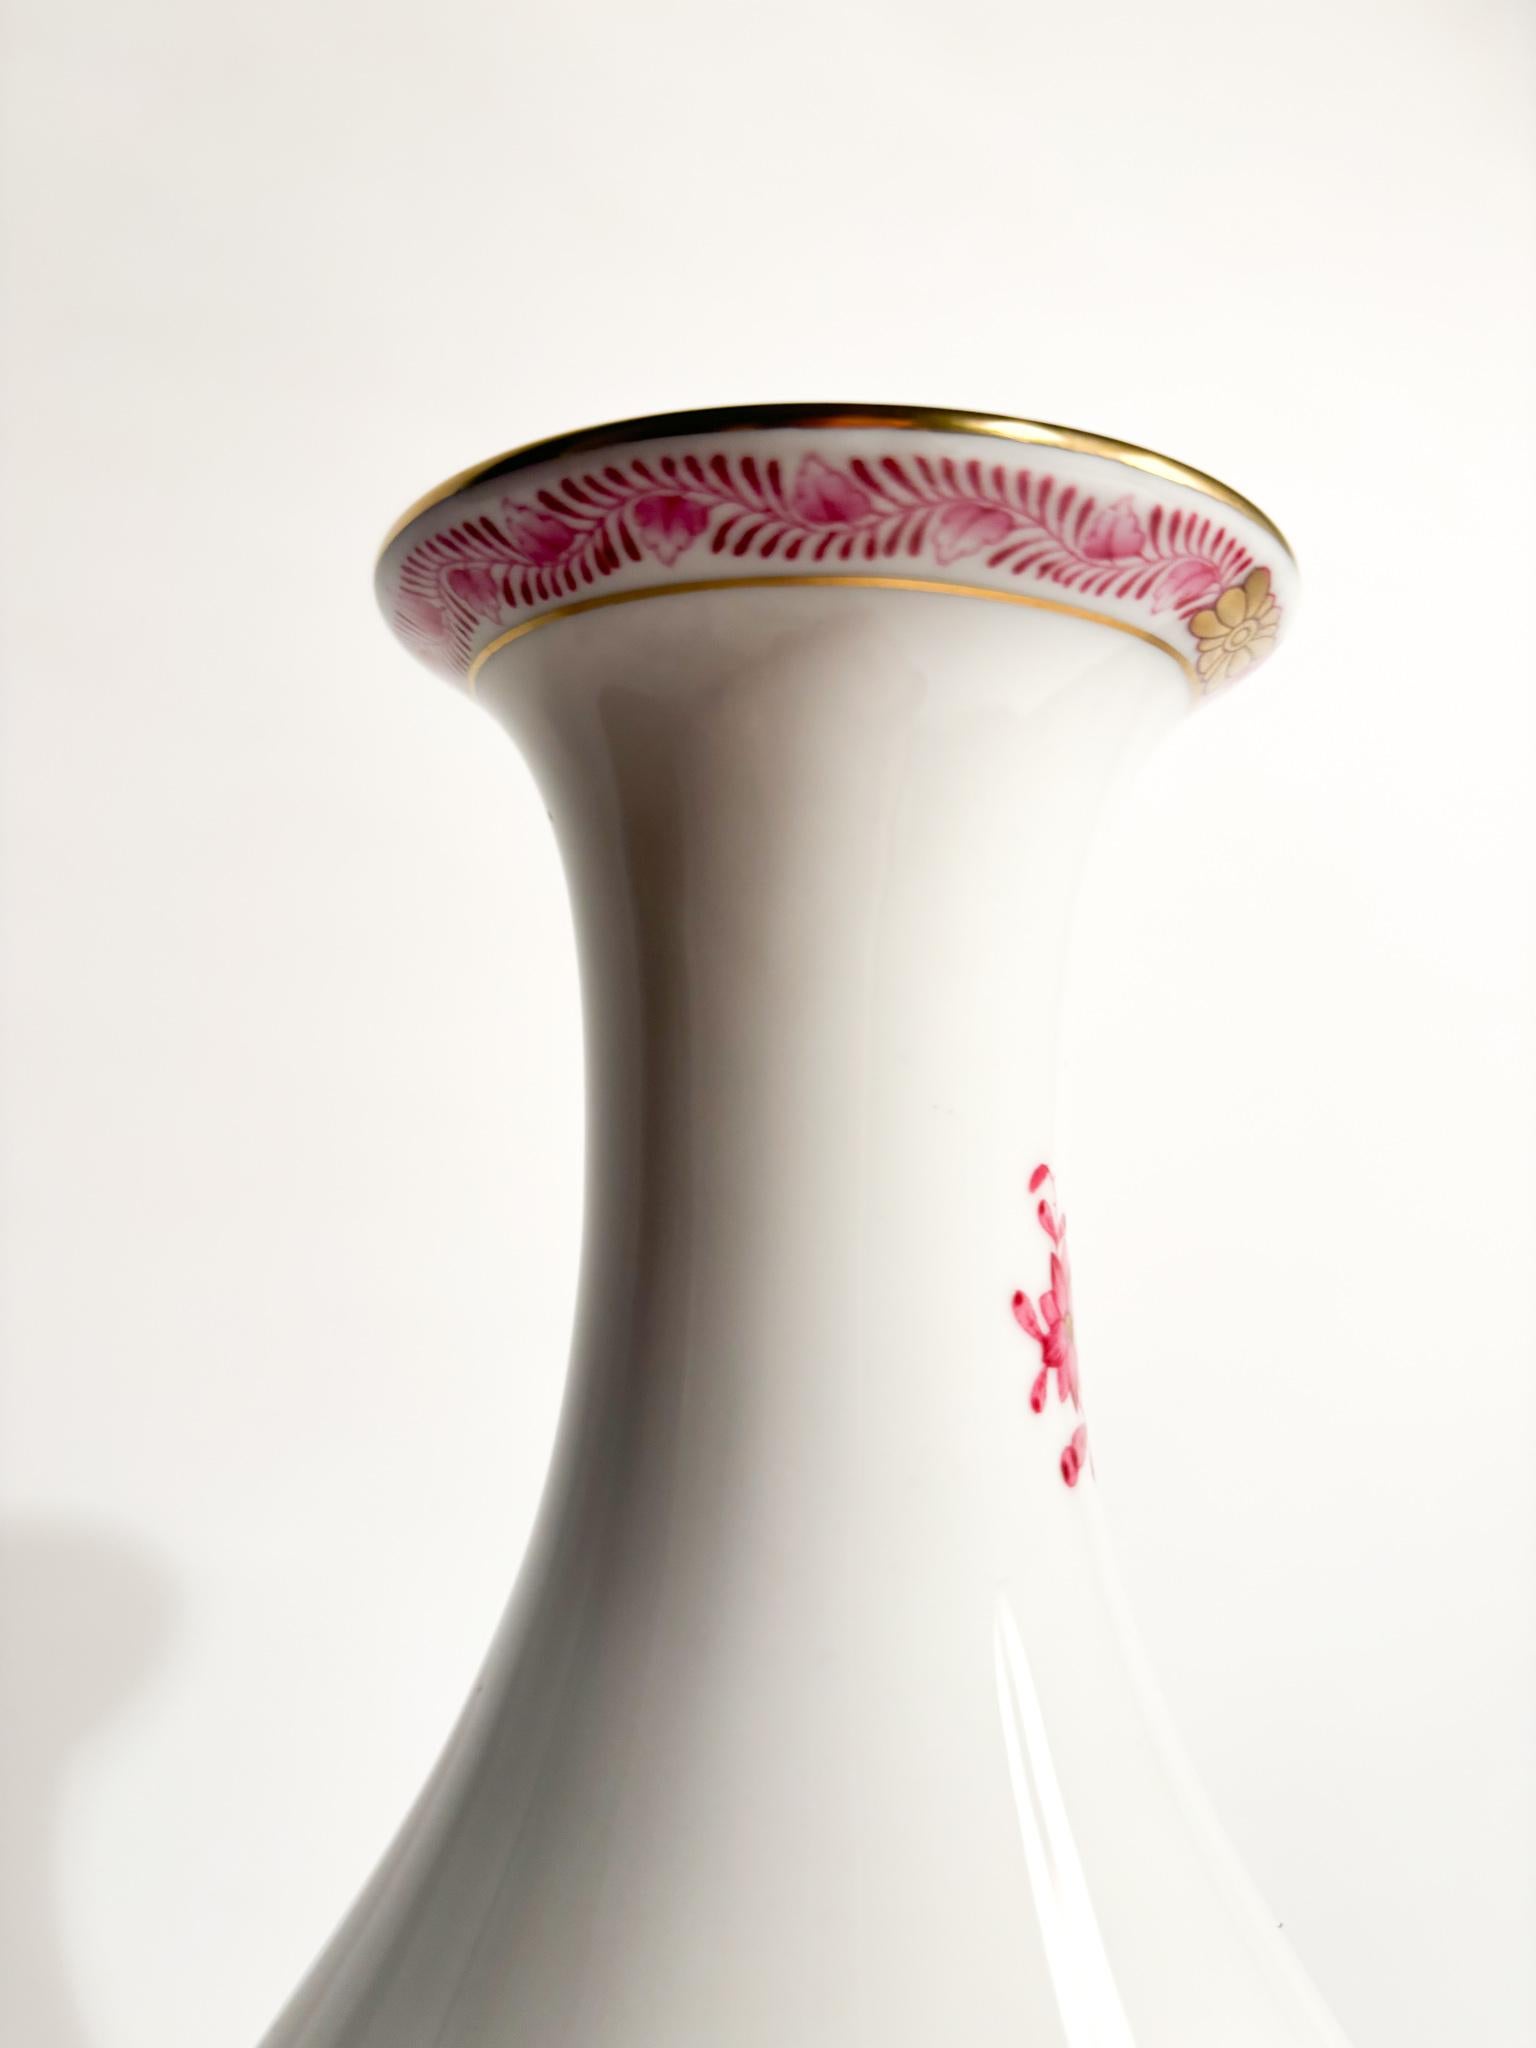 Mid-20th Century Herend Apponyi Pink Porcelain Vase from the 1950s For Sale